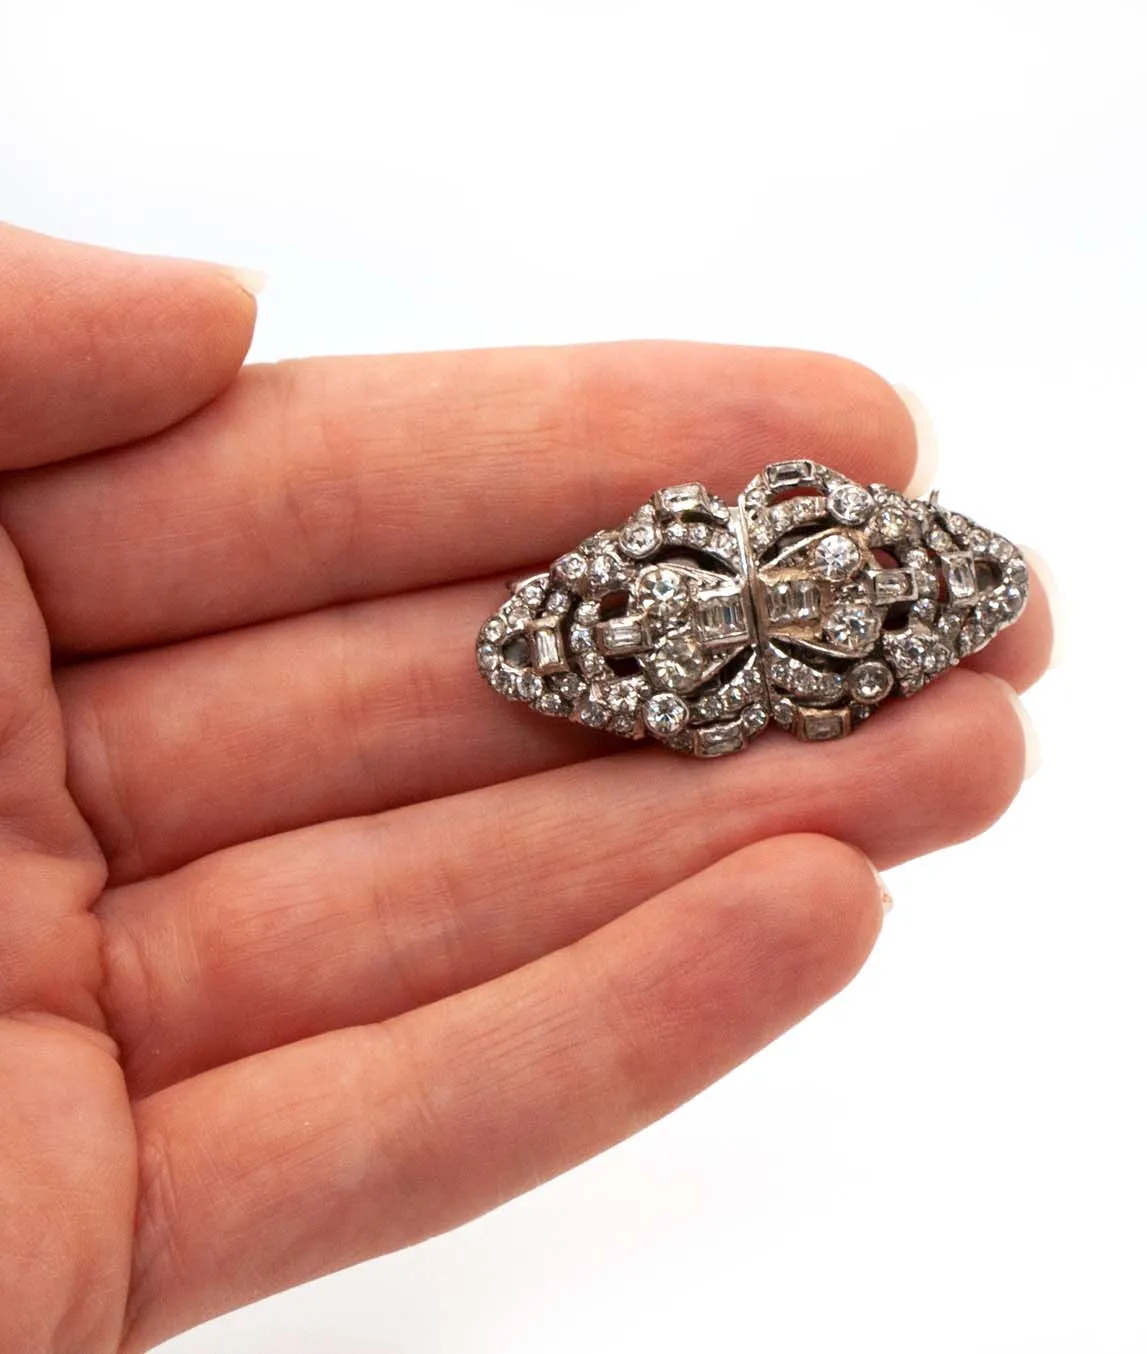 Small double dress clip brooch with clear crystals on silver held in hand